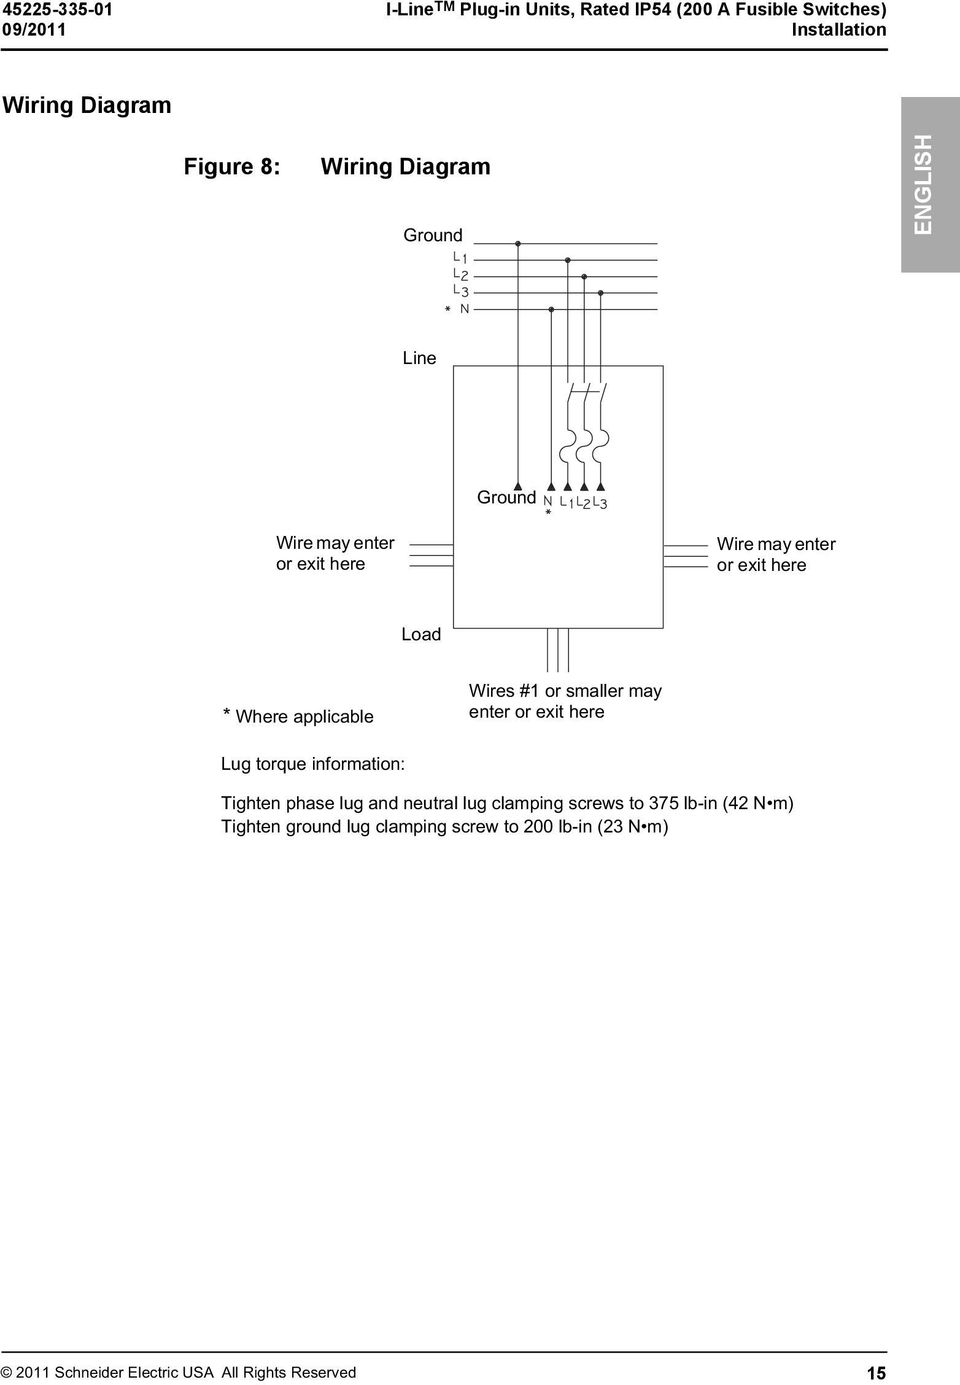 Wires #1 or smaller may enter or exit here Lug torque information: Tighten phase lug and neutral lug clamping screws to